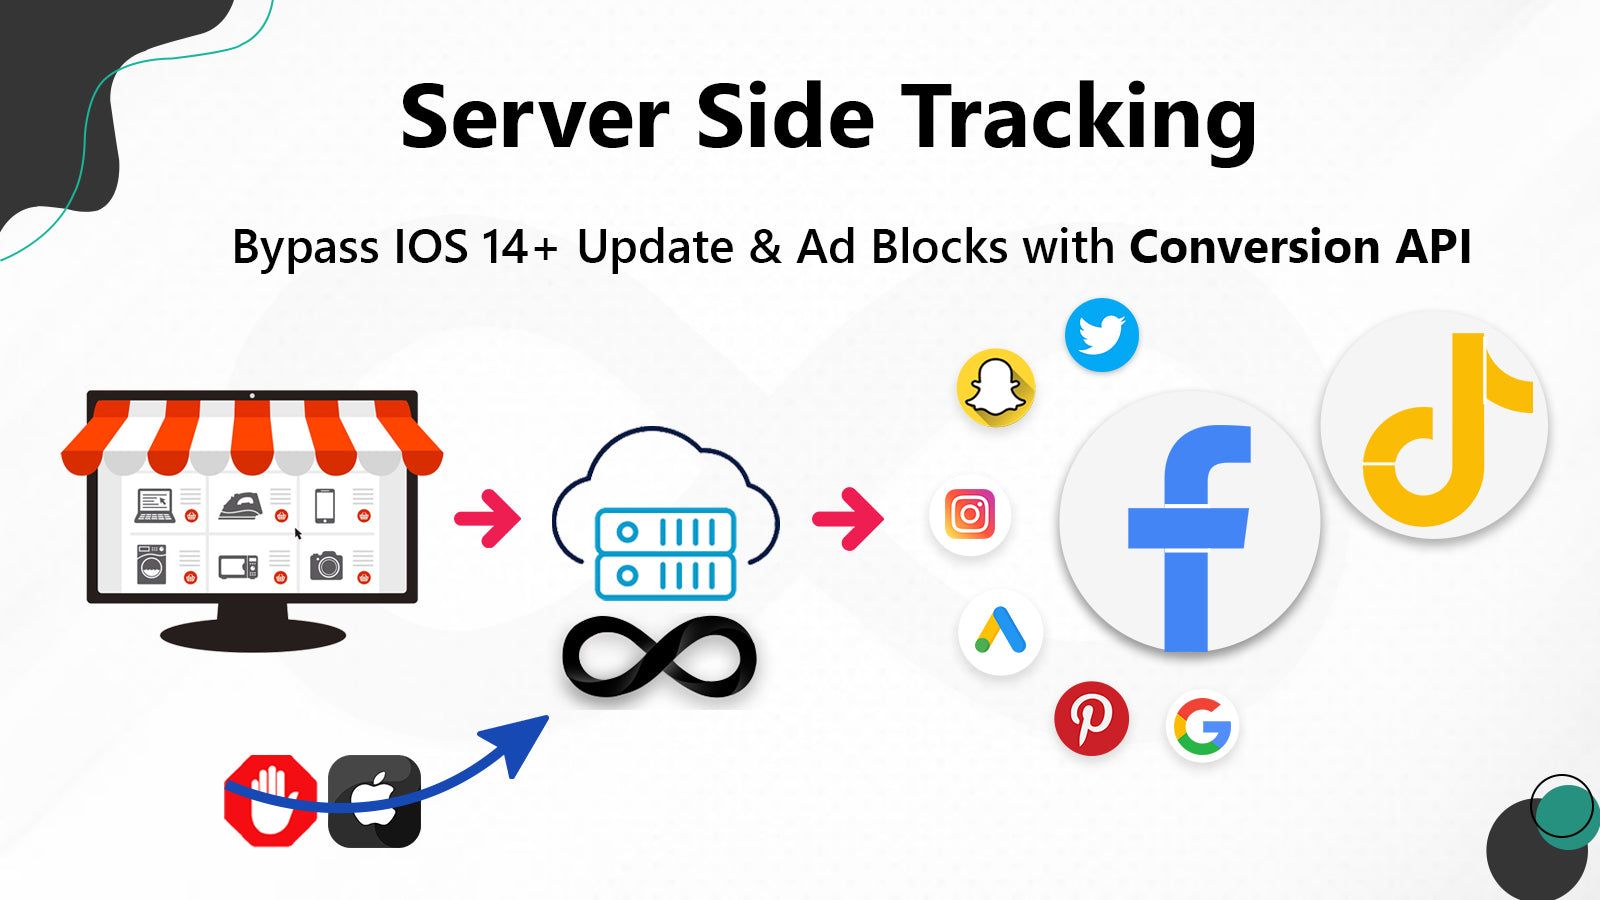 Server Side Tracking by using Conversion Api Facebook 